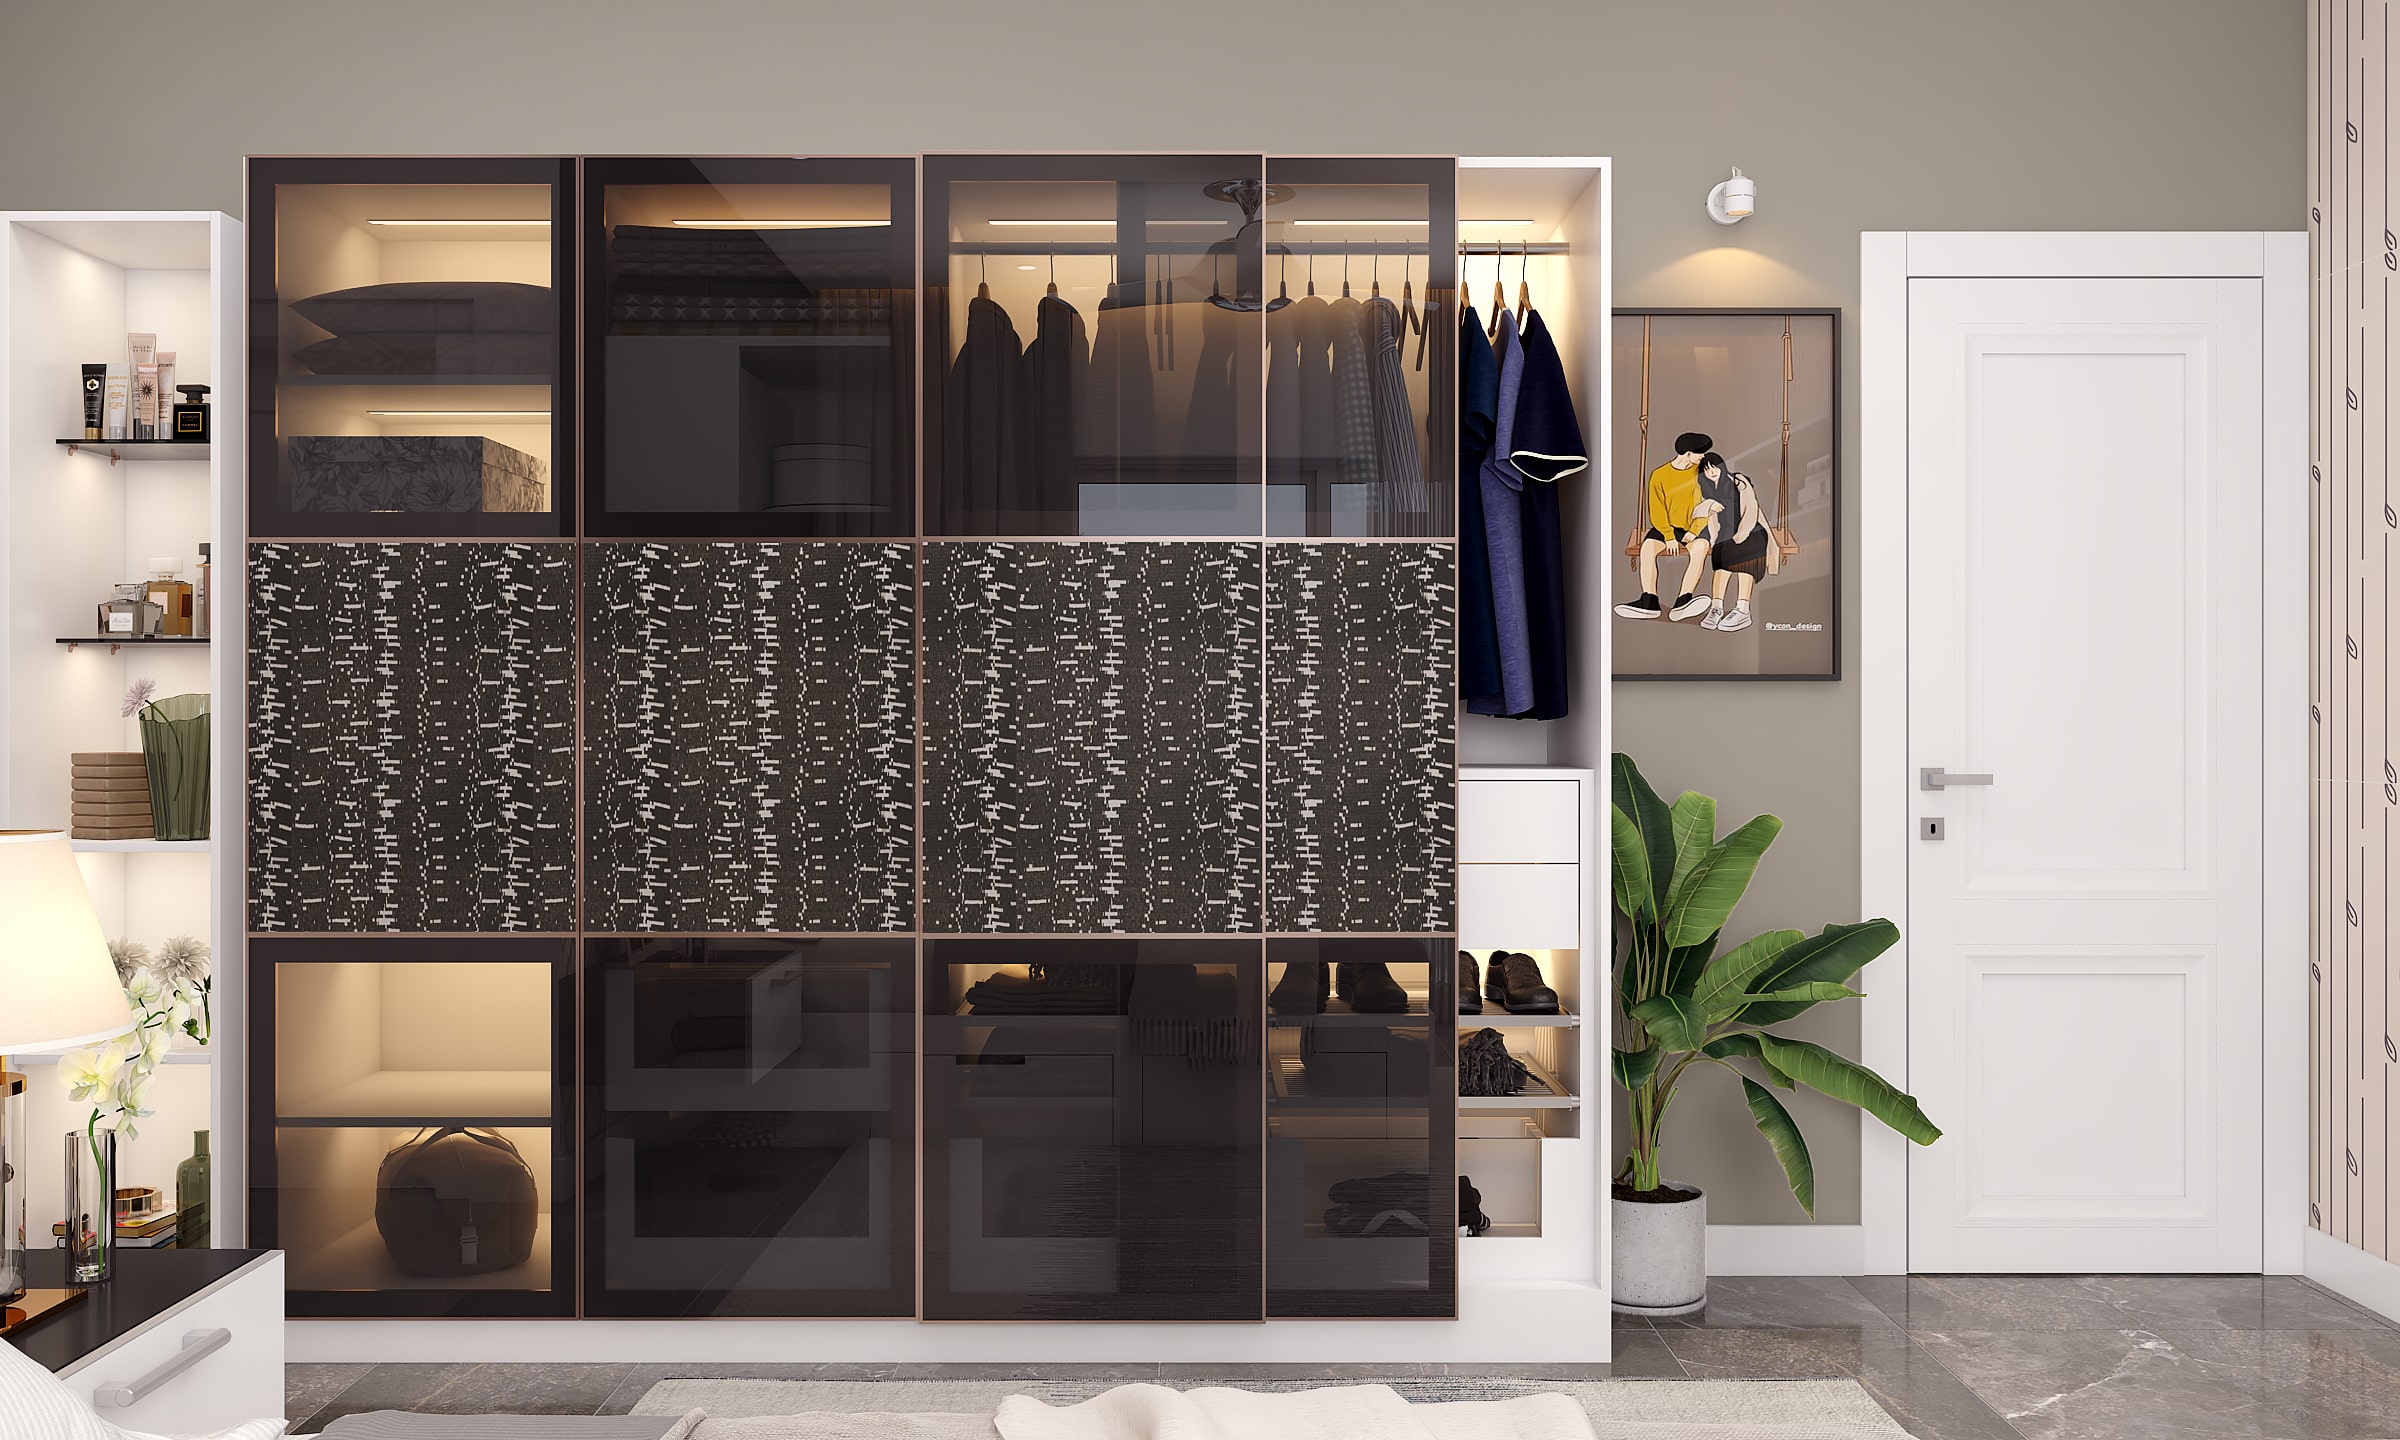 High-end interiors feature a sliding door wardrobe with glass and patterned engineered veneer